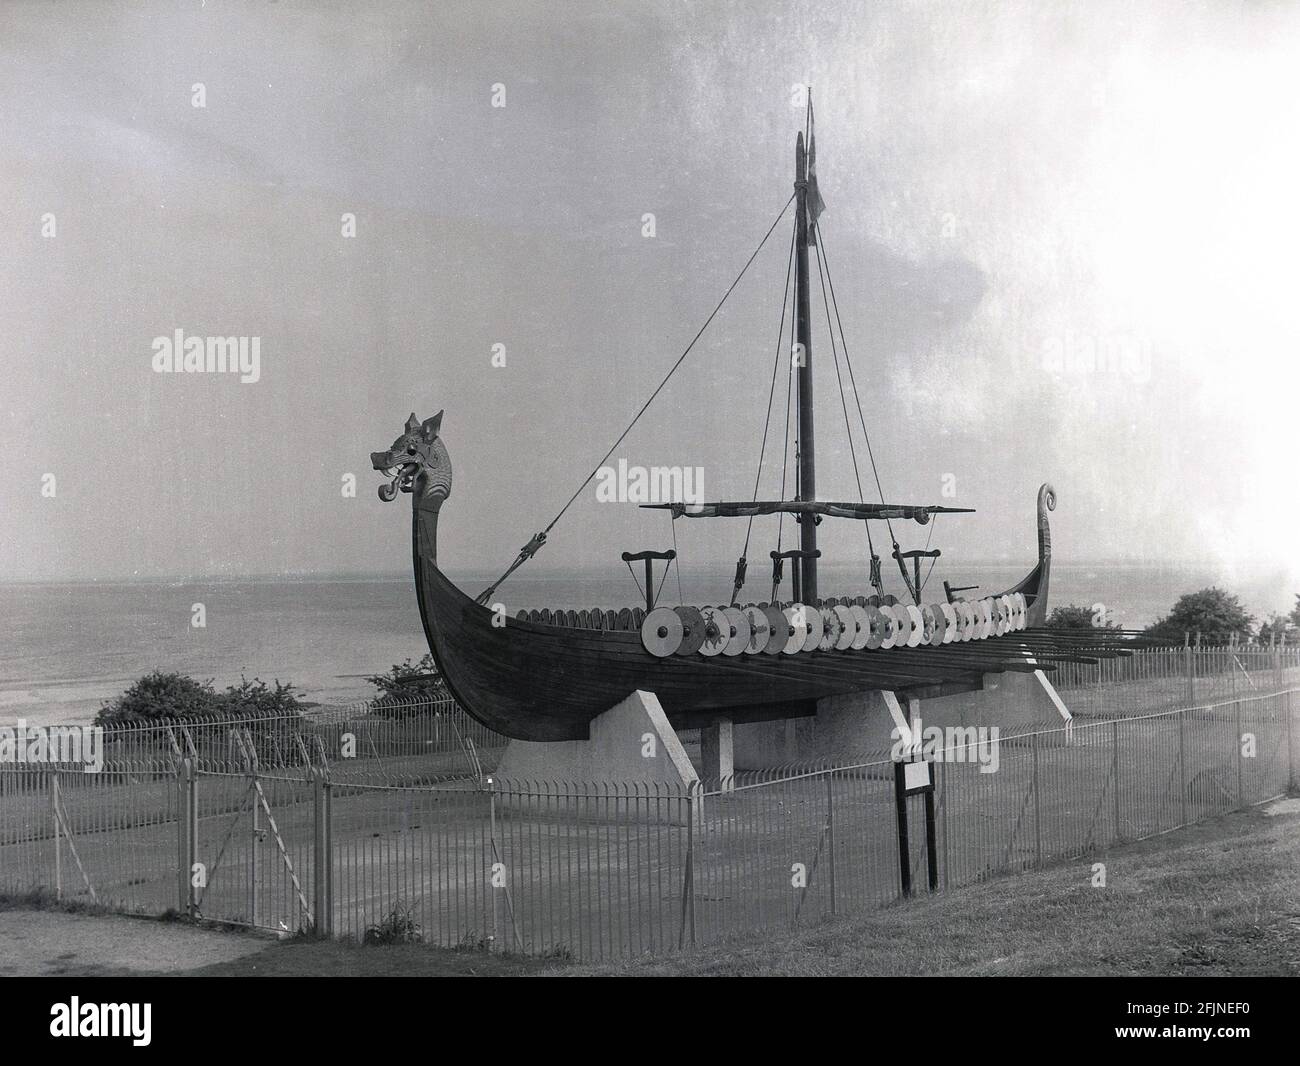 1958, the Viking ship or longboat 'Hugin' on display at the coast on the Pegwell Bay cliff top, Ramsgate, Kent, England, UK. A reconstructed longship, The Hugin, a gift from the Danish govt to commemorate the 1500 anniversary of Hengist and Horsa, leaders of the Anglo-Saxon invasion at nearby Ebbsfleet, arrived at Viking Bay, Broadstairs in 1949. It is a replica of the Gokstad ship, ca 890. Stock Photo